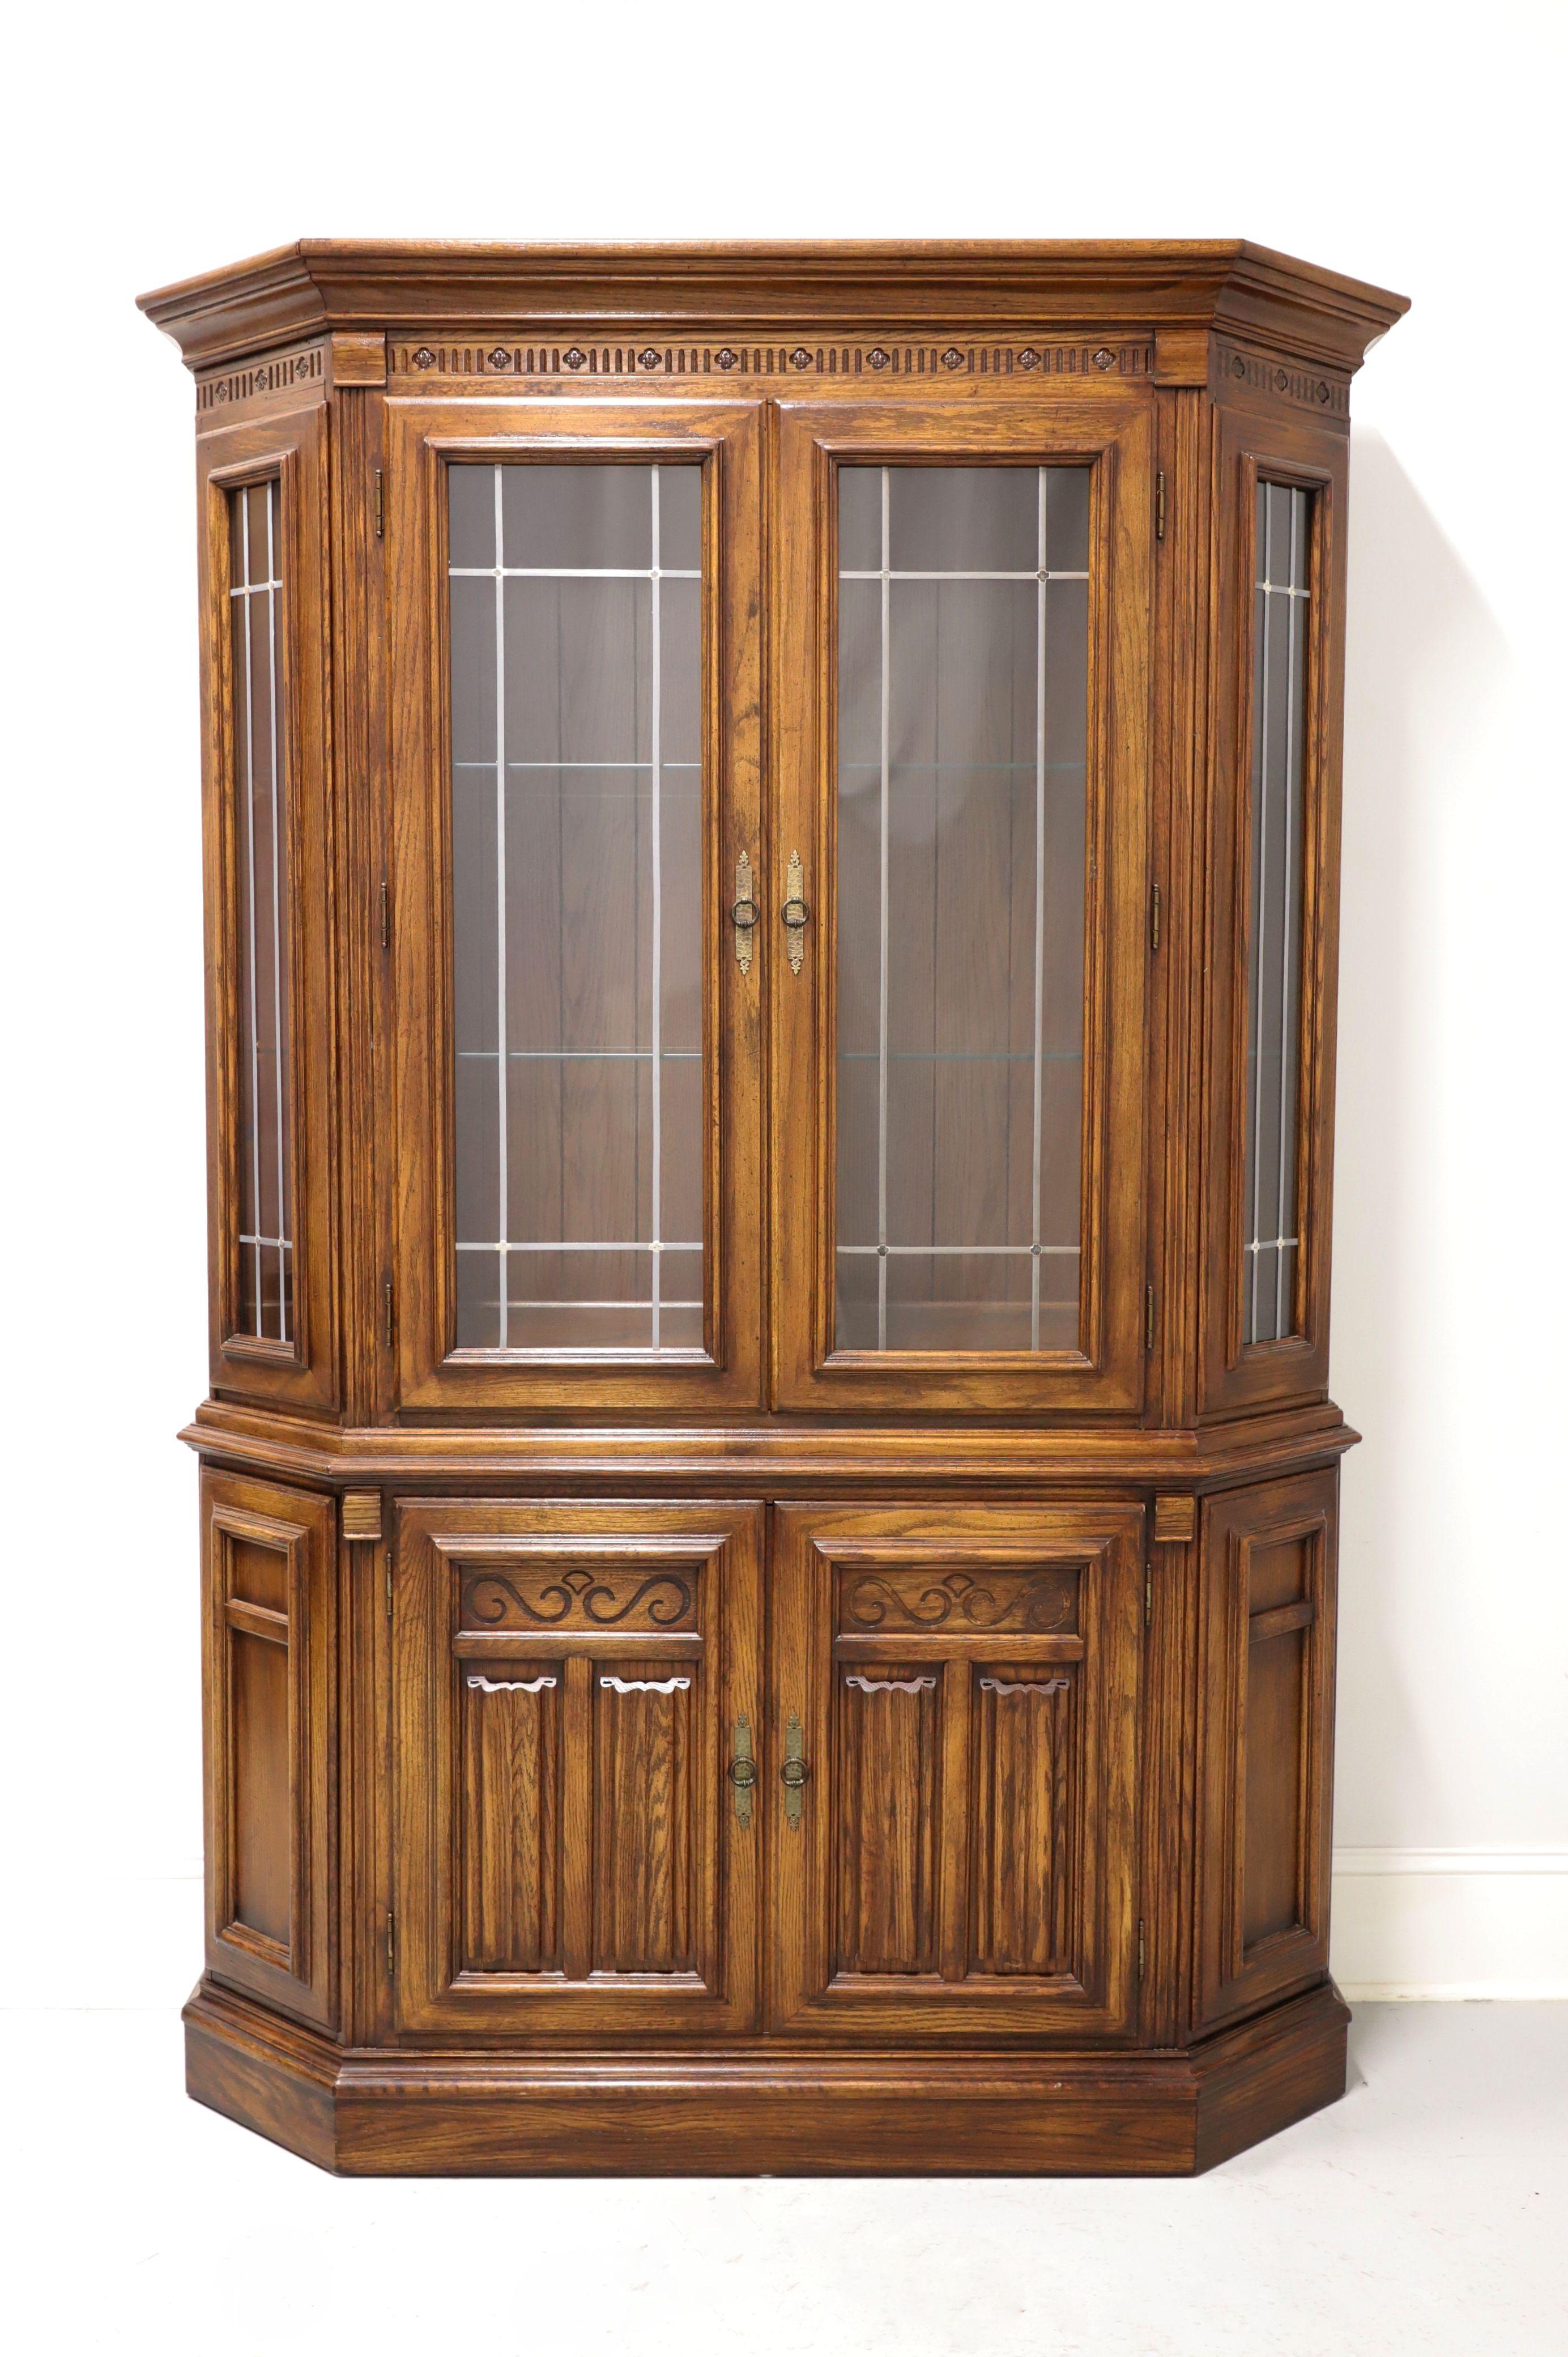 A Jacobean style china cabinet, unbranded, similar quality to Thomasville. Oak with crown & dentil molding to the top, brass hardware, and a solid base. Upper cabinet has two metal paned glass doors & two angled side panels, is lighted, and has two